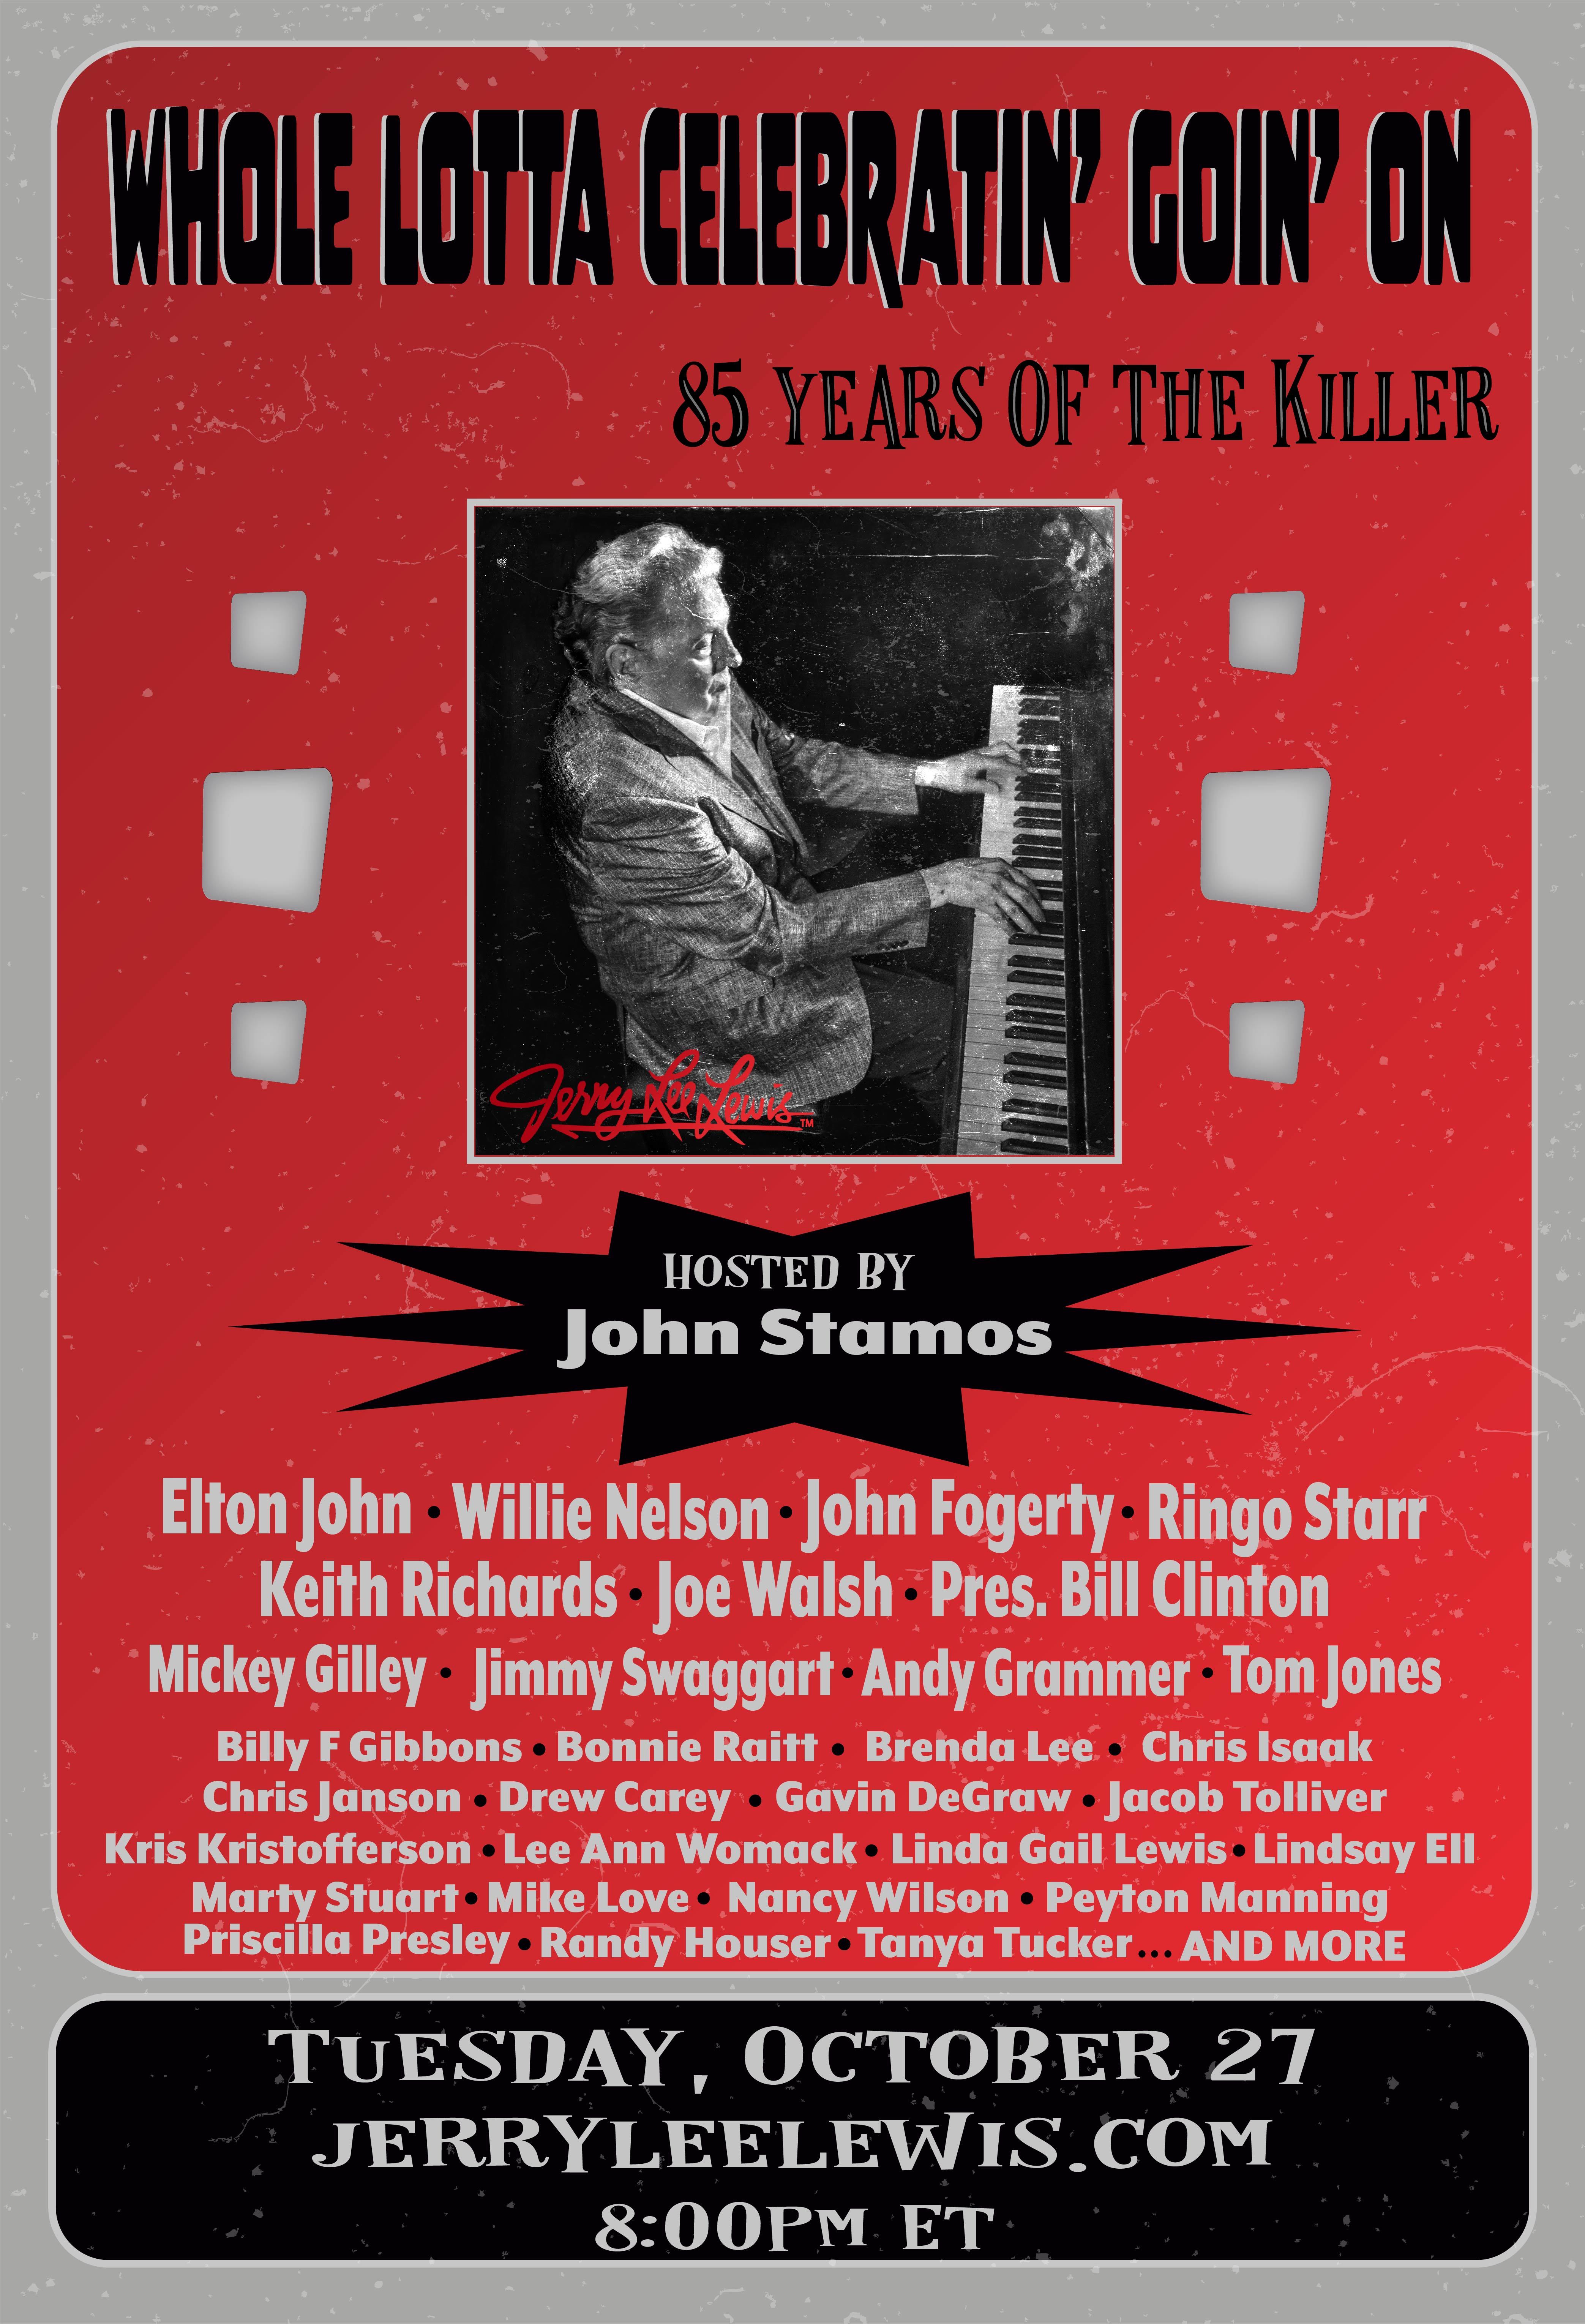 Whole Lotta Celebratin’ Goin On: 85 Years Of The Killer Adds Ringo Starr, Keith Richards, John Fogerty, Andy Grammer, Peyton Manning